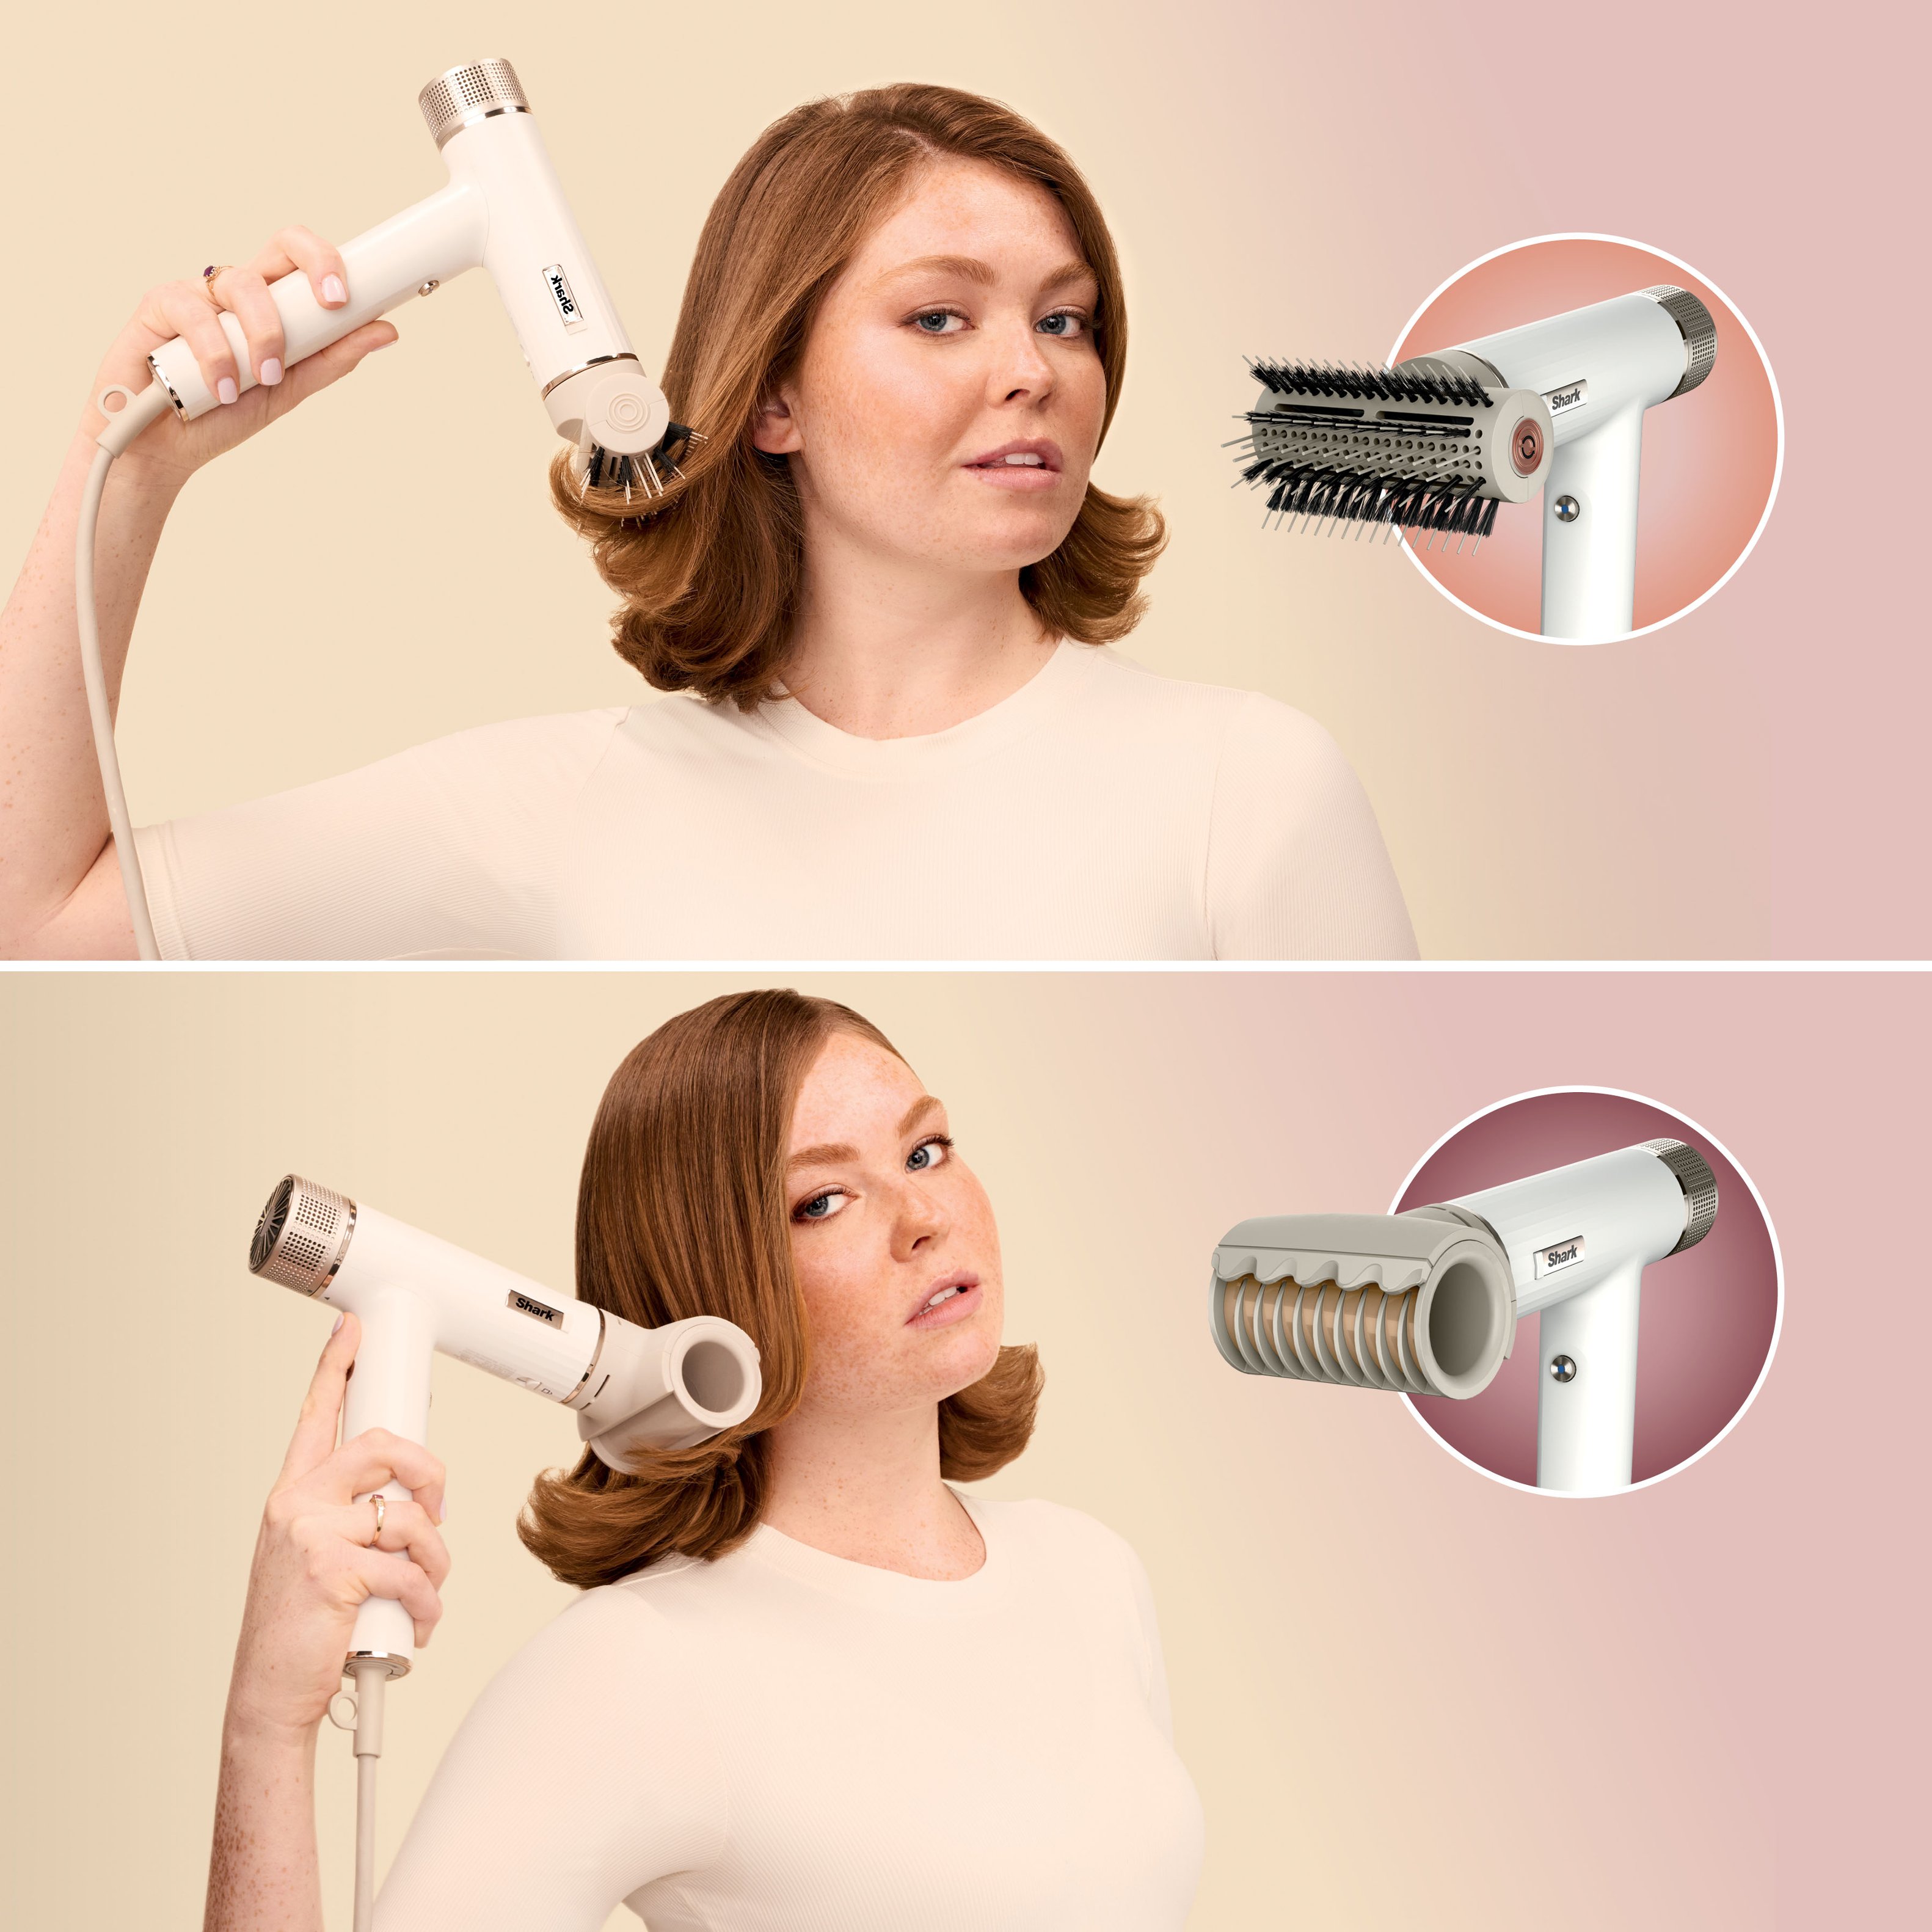 Hair Dryer  Bouncy, Shaped Blowout For Wavy Hair (Shark® SpeedStyle™) 